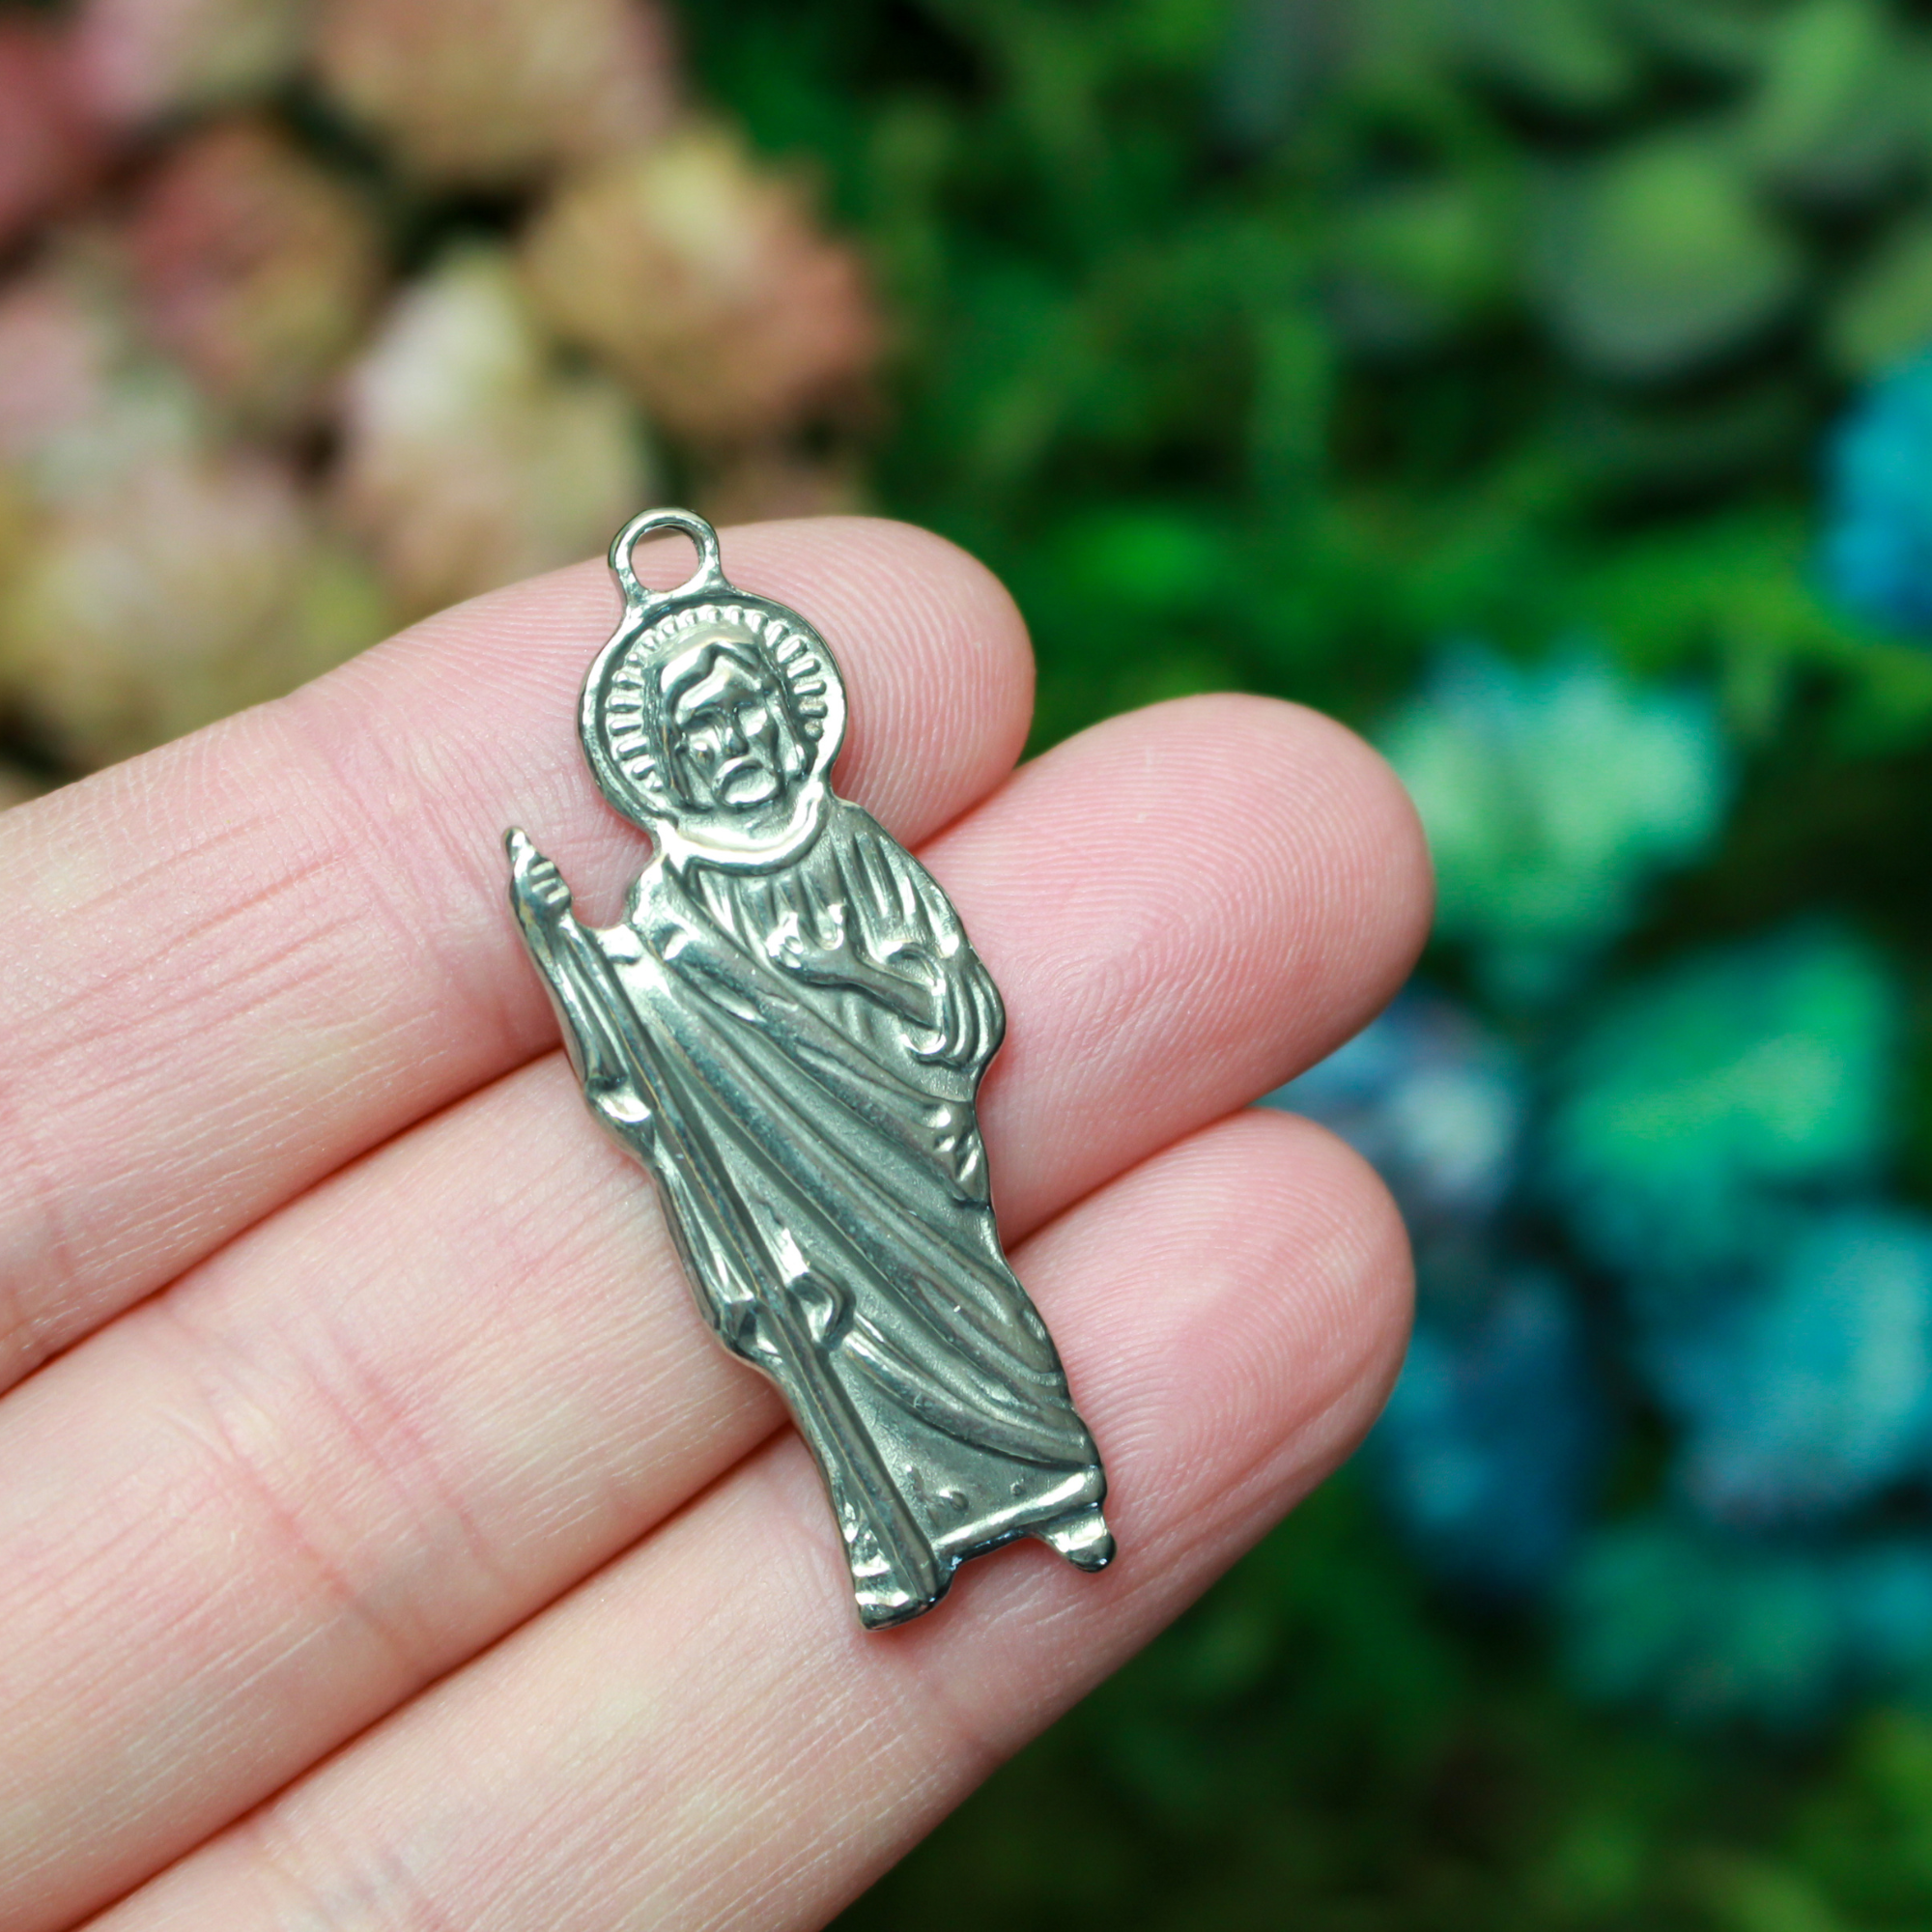 Jesus Christ figural charm pendant that depicts Jesus as the Good Shepherd holding a shepherd's staff., 1.5" long